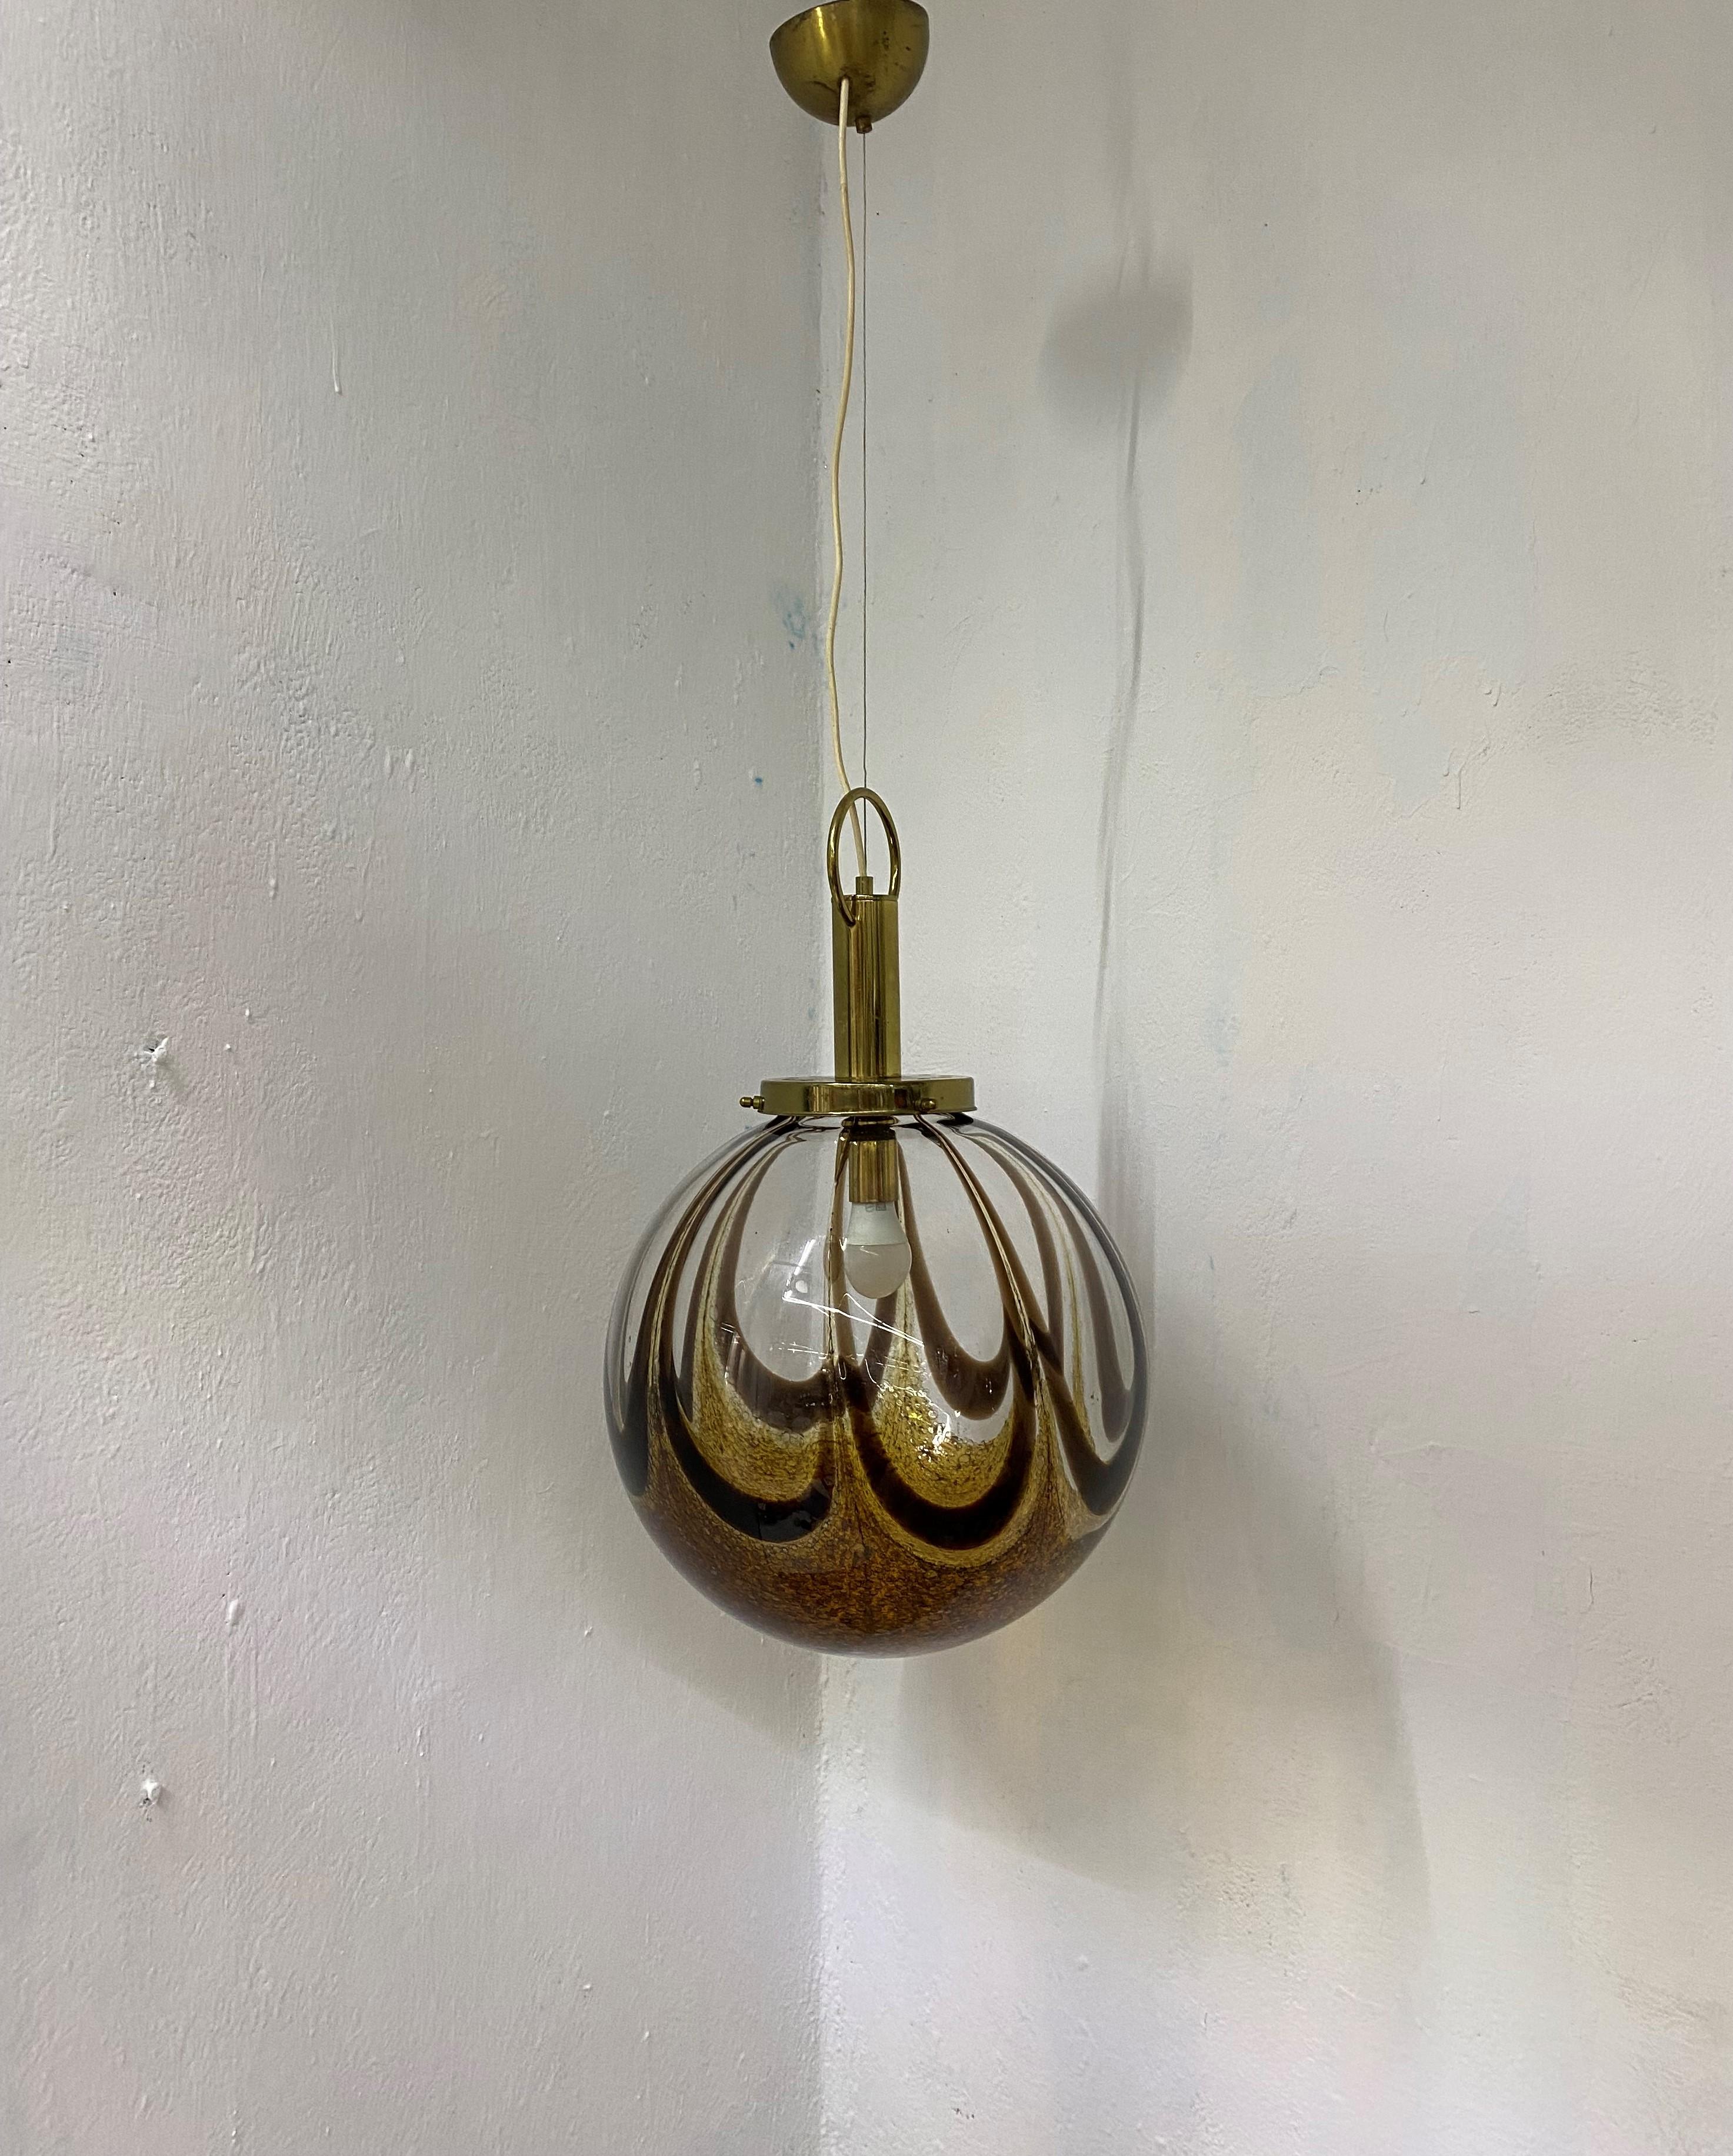 Beautiful and large pendant sphere in brown, orange (yellow) and clear hand-blown murano glass, attributed to Mazzega, circa 1970
Measure: Diameter is 40cm.
Height can easily be adjusted to the desired length.